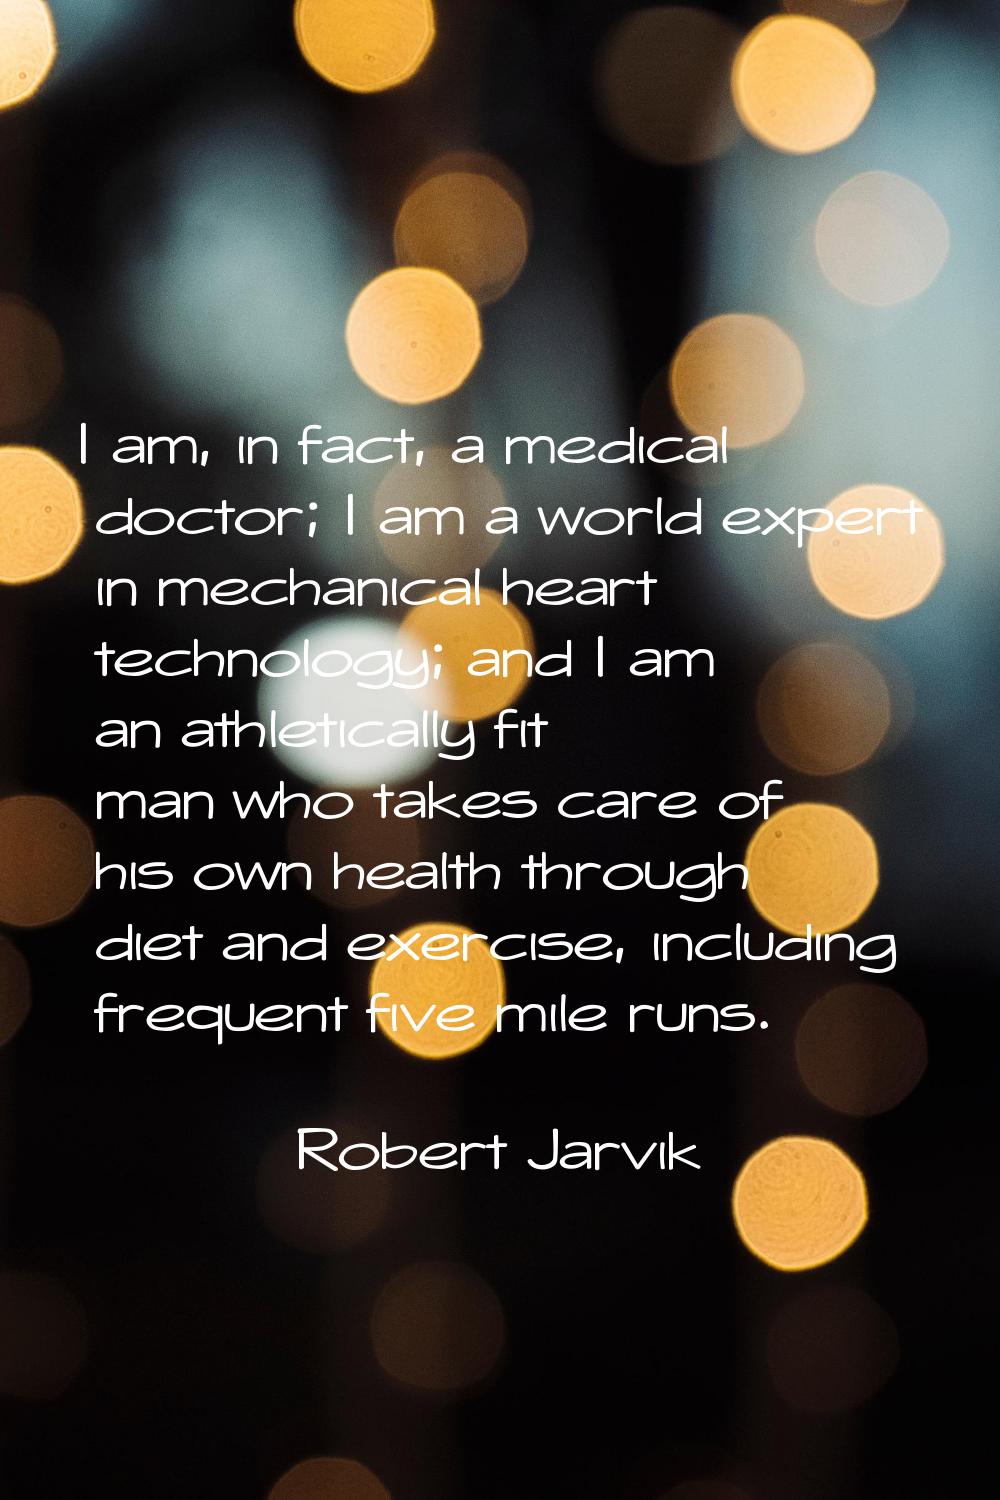 I am, in fact, a medical doctor; I am a world expert in mechanical heart technology; and I am an at